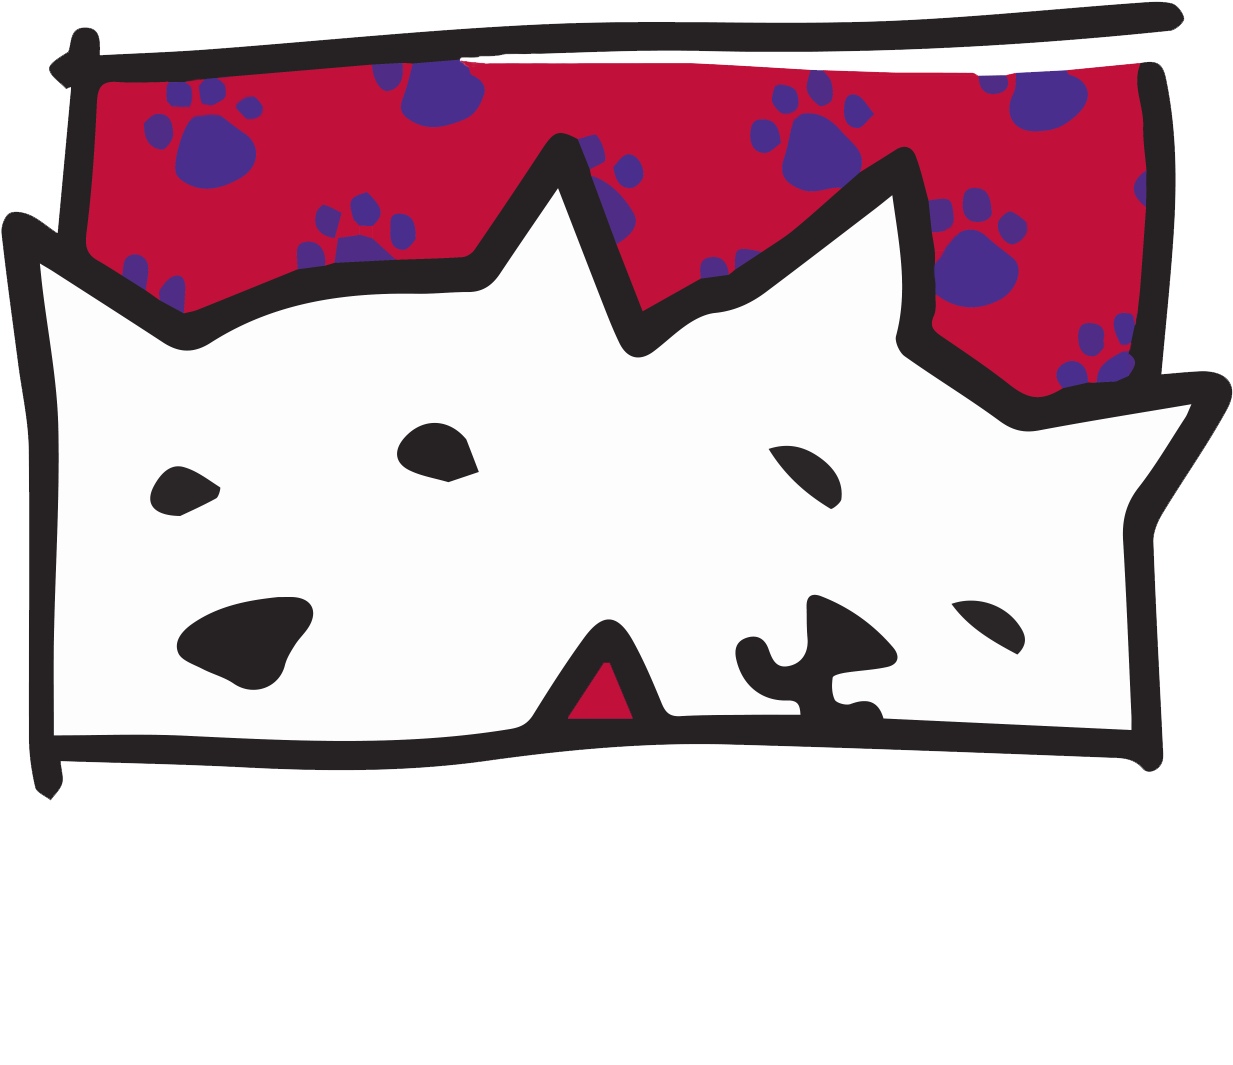 Phinney's Friends (1500x1248)